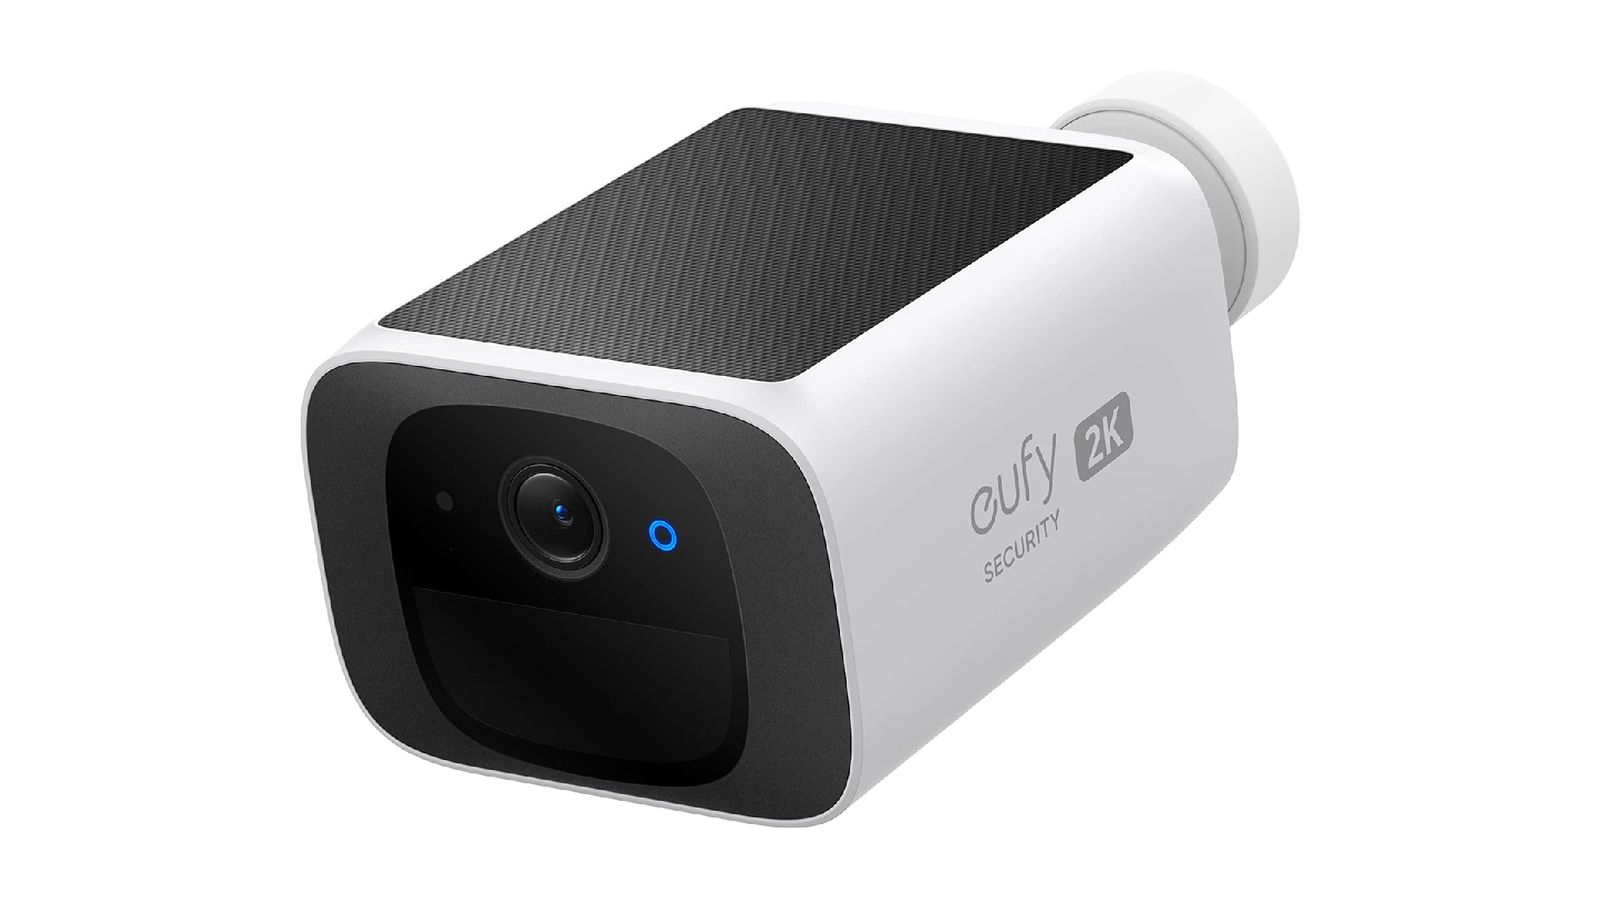 eufy Security SoloCam S220 product image of a white and black mountable security camera.